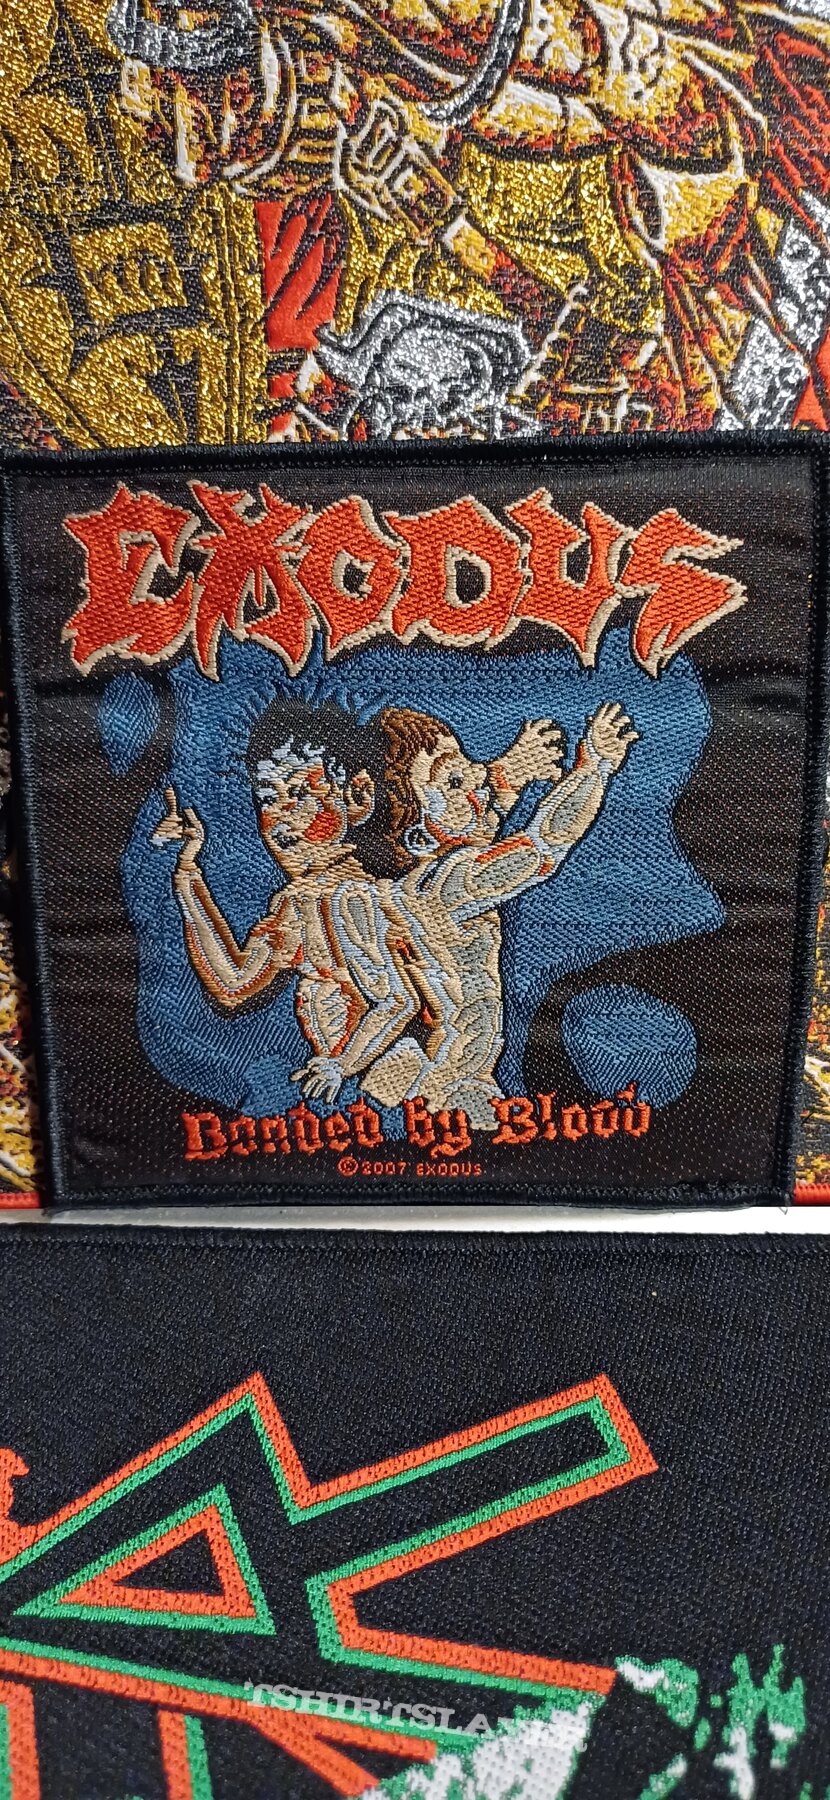 Exodus-bonded by blood patch